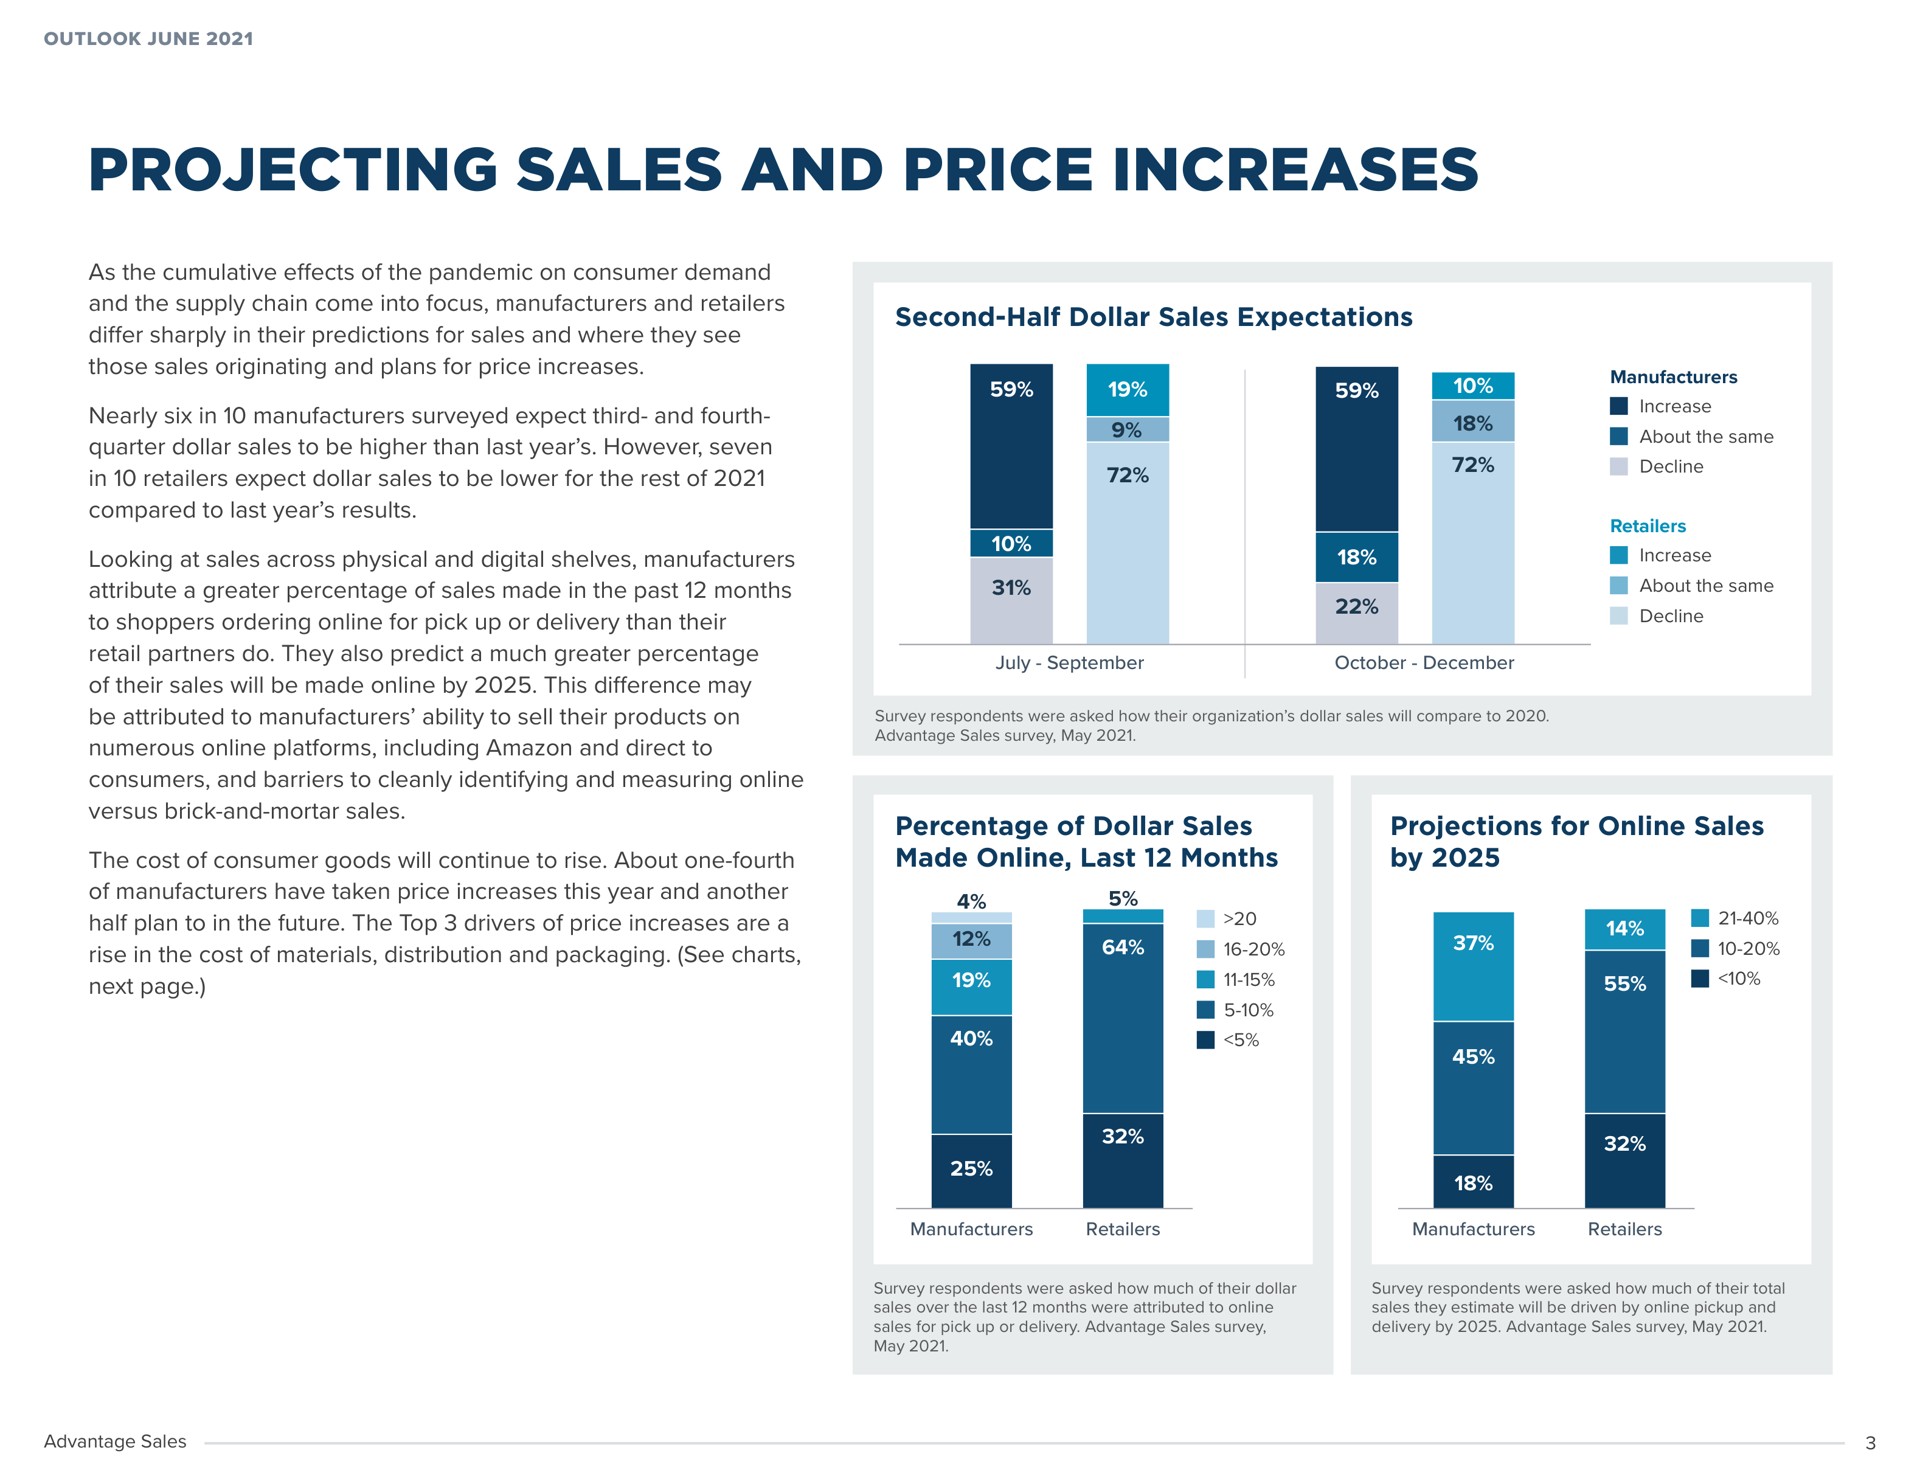 projecting sales and price increases as the cumulative effects of the pandemic on consumer demand and the supply chain come into focus manufacturers and retailers differ sharply in their predictions for sales and where they see those sales originating and plans for price increases nearly six in manufacturers surveyed expect third and fourth quarter dollar sales to be higher than last year however seven in retailers expect dollar sales to be lower for the rest of compared to last year results looking at sales across physical and digital shelves manufacturers attribute a greater percentage of sales made in the past months to shoppers ordering for pick up or delivery than their retail partners do they also predict a much greater percentage of their sales will be made by this difference may be attributed to manufacturers ability to sell their products on numerous platforms including and direct to consumers and barriers to cleanly identifying and measuring versus brick and mortar sales the cost of consumer goods will continue to rise about one fourth of manufacturers have taken price increases this year and another half plan to in the future the top drivers of price increases are a rise in the cost of materials distribution and packaging see charts next page second half dollar sales expectations percentage of dollar sales made last months projections for sales by | Advantage Solutions